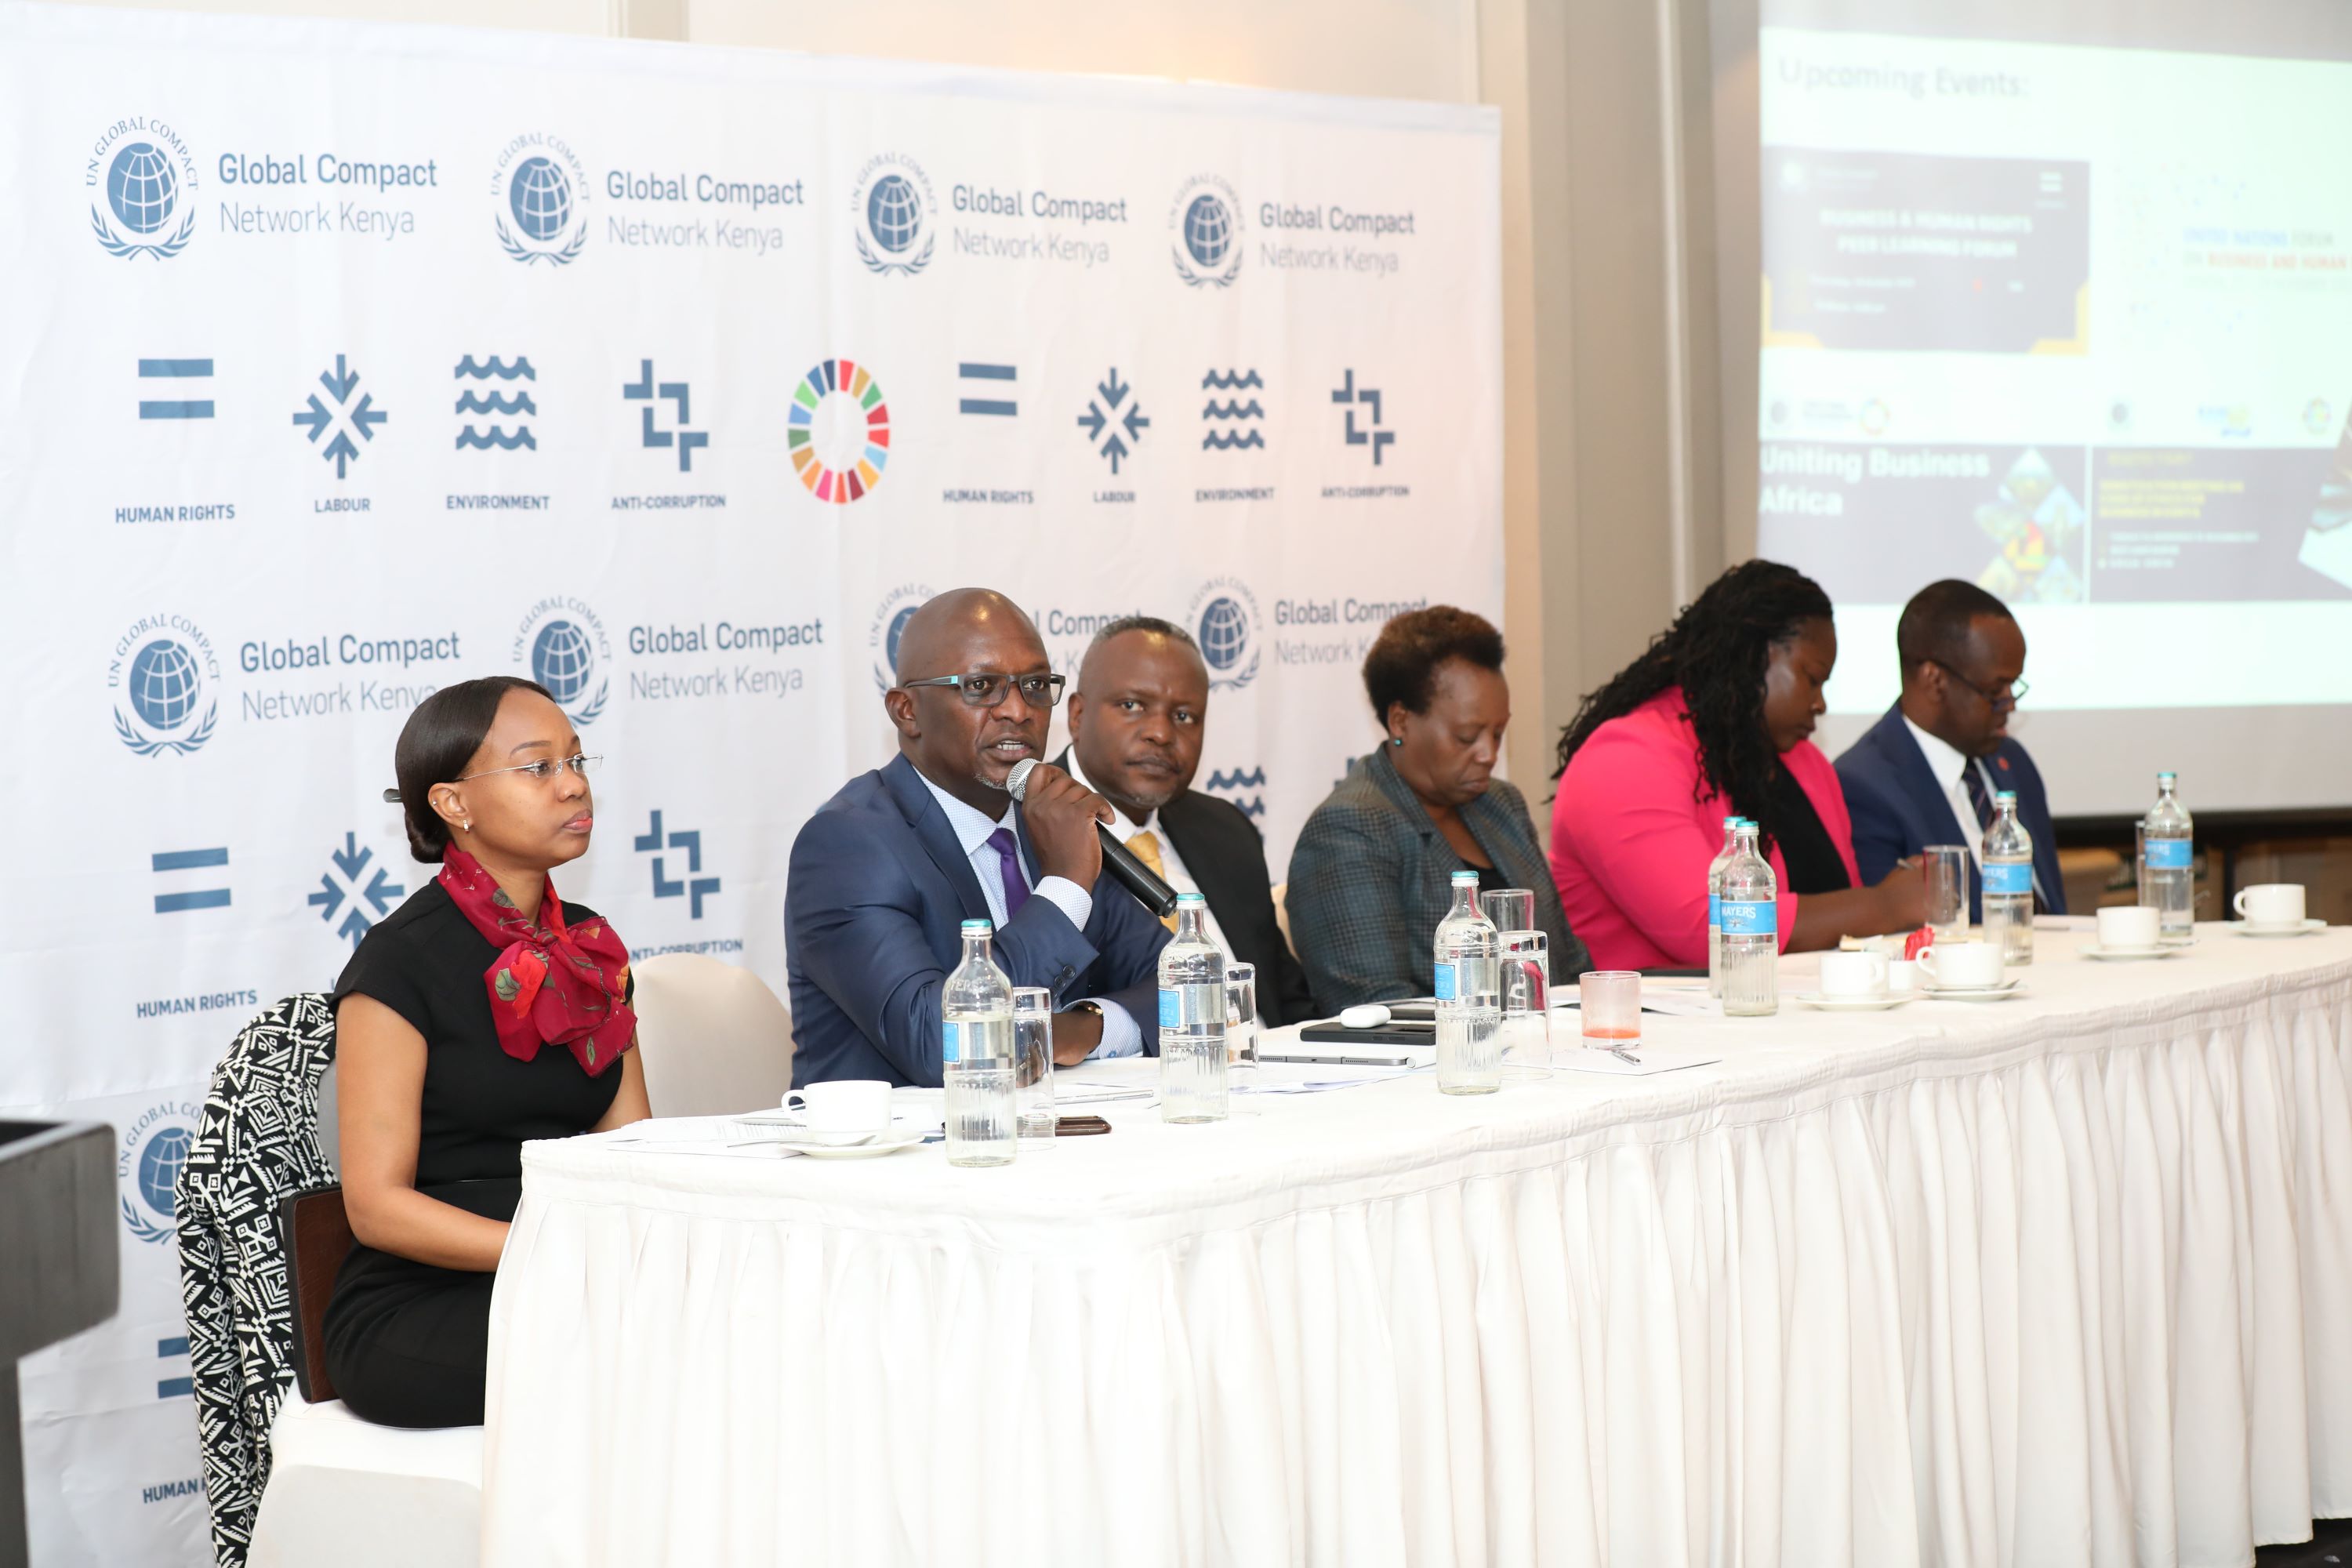 Global Compact Network Kenya holds its 9th Annual General Assembly